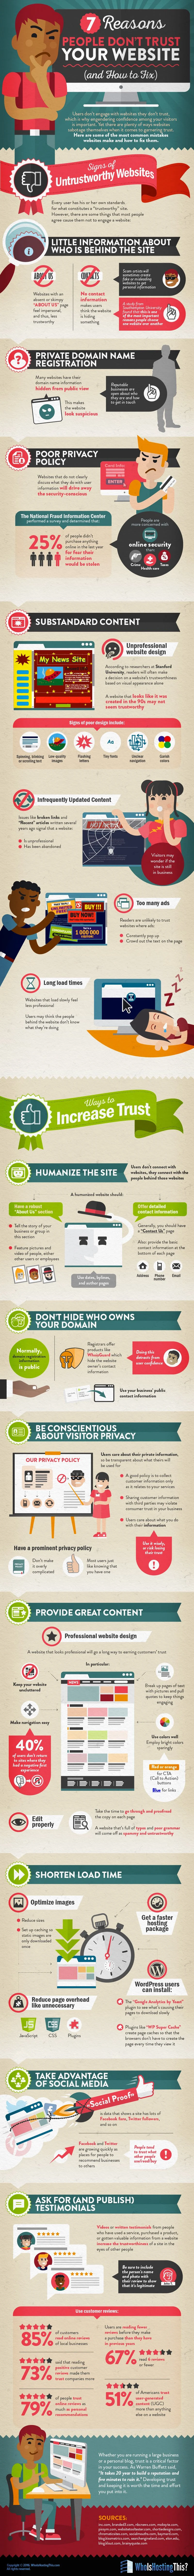 7 Reasons People Don’t Trust Your Website - #infographic